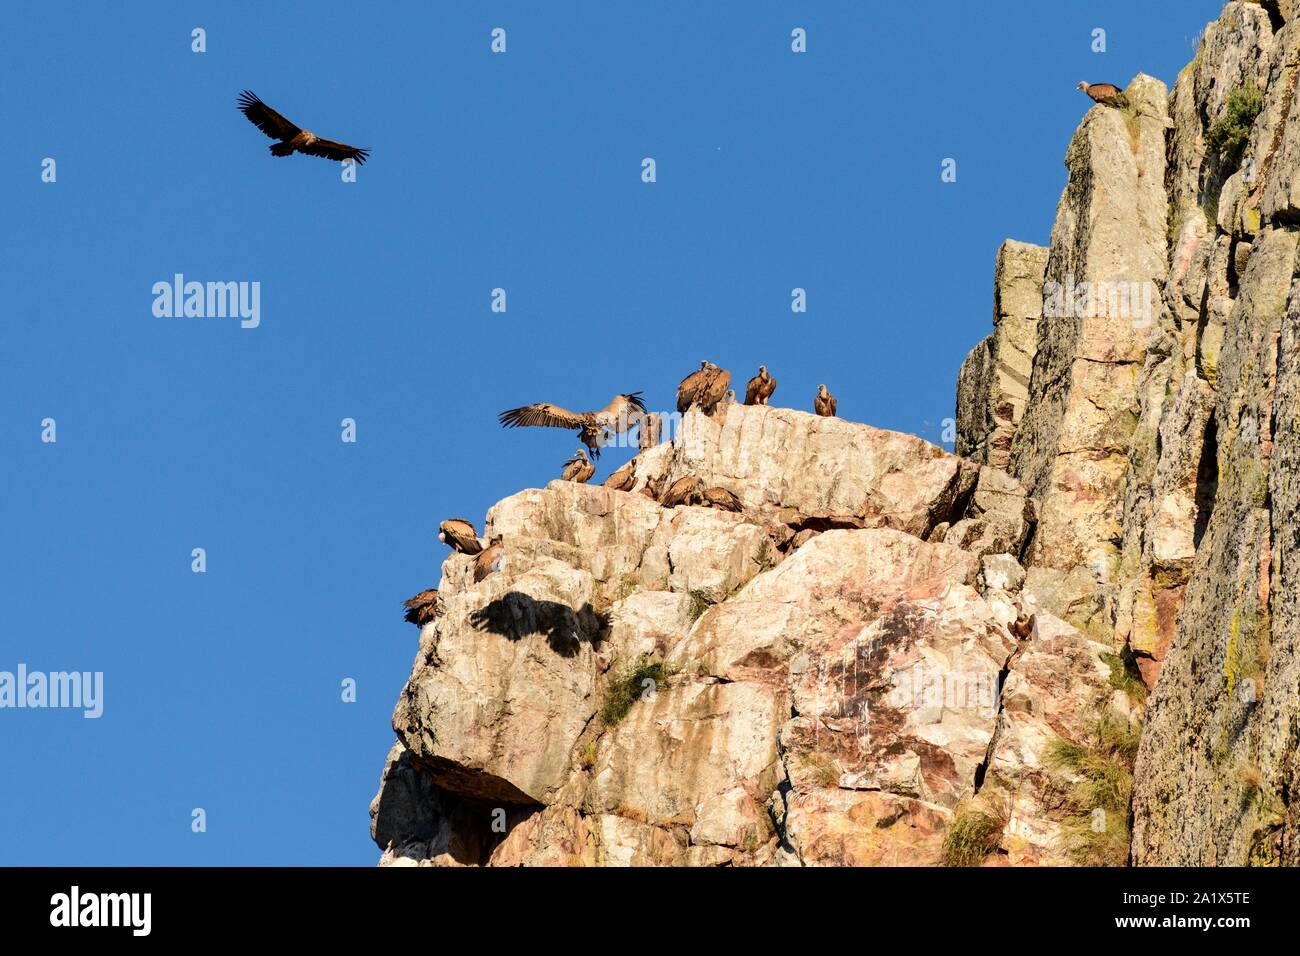 Griffon vulture (Gyps fulvus), Flock to resting place on rock head, Monfrague National Park, Extremadura, Spain Stock Photo